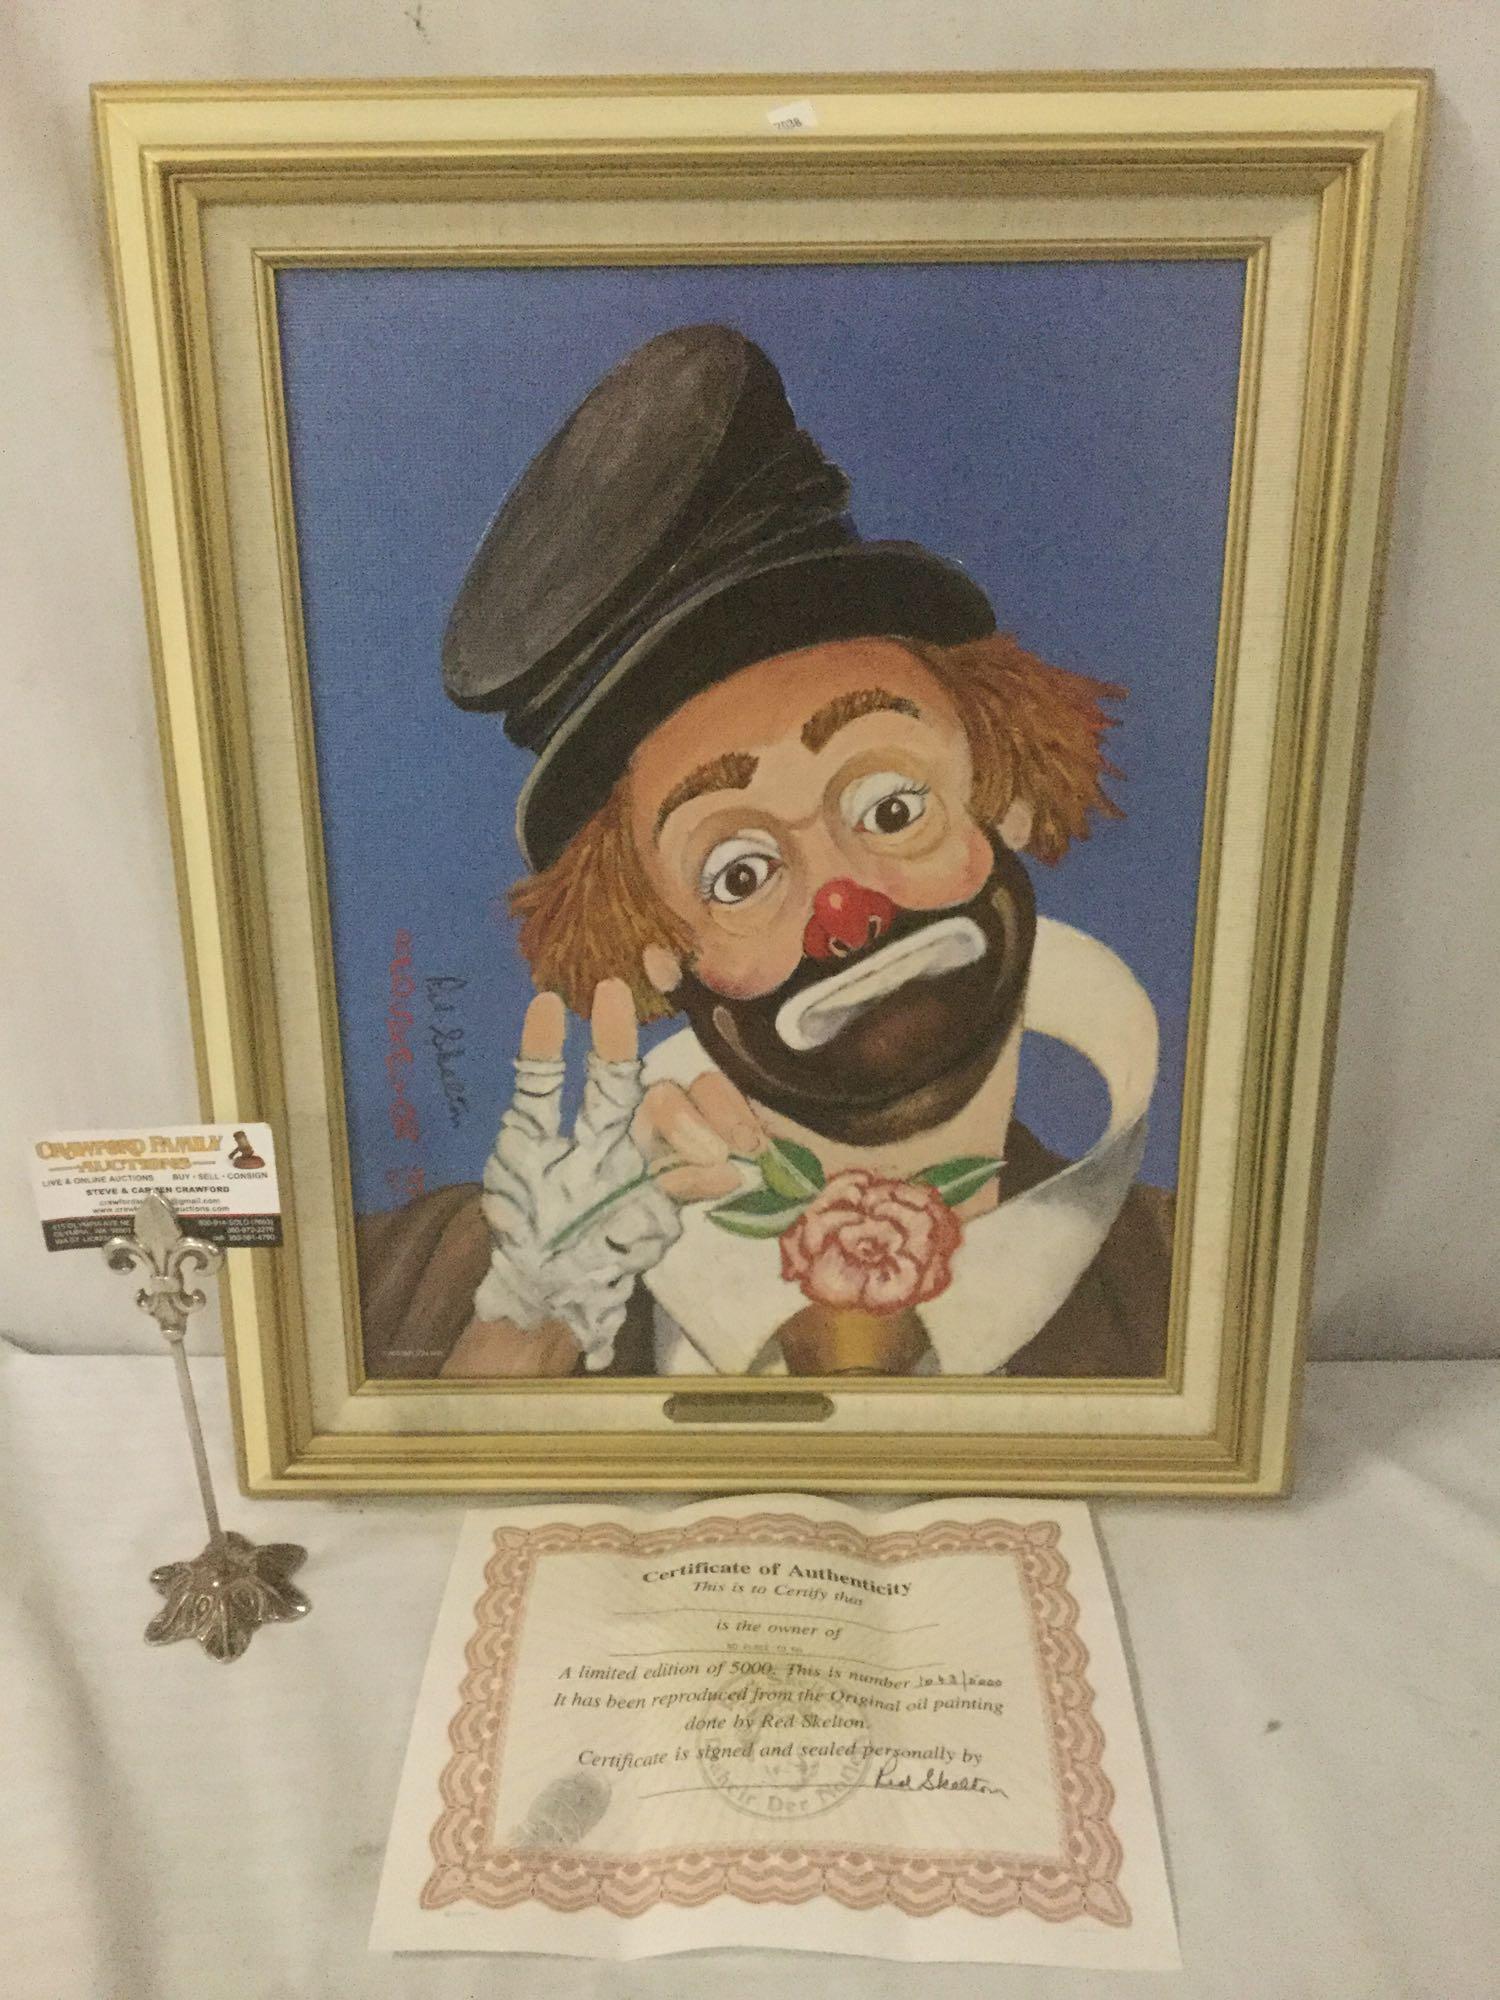 No Place To Go - framed Red Skelton ltd ed repro canvas print w/COA, #'d 1043/5000, & signed